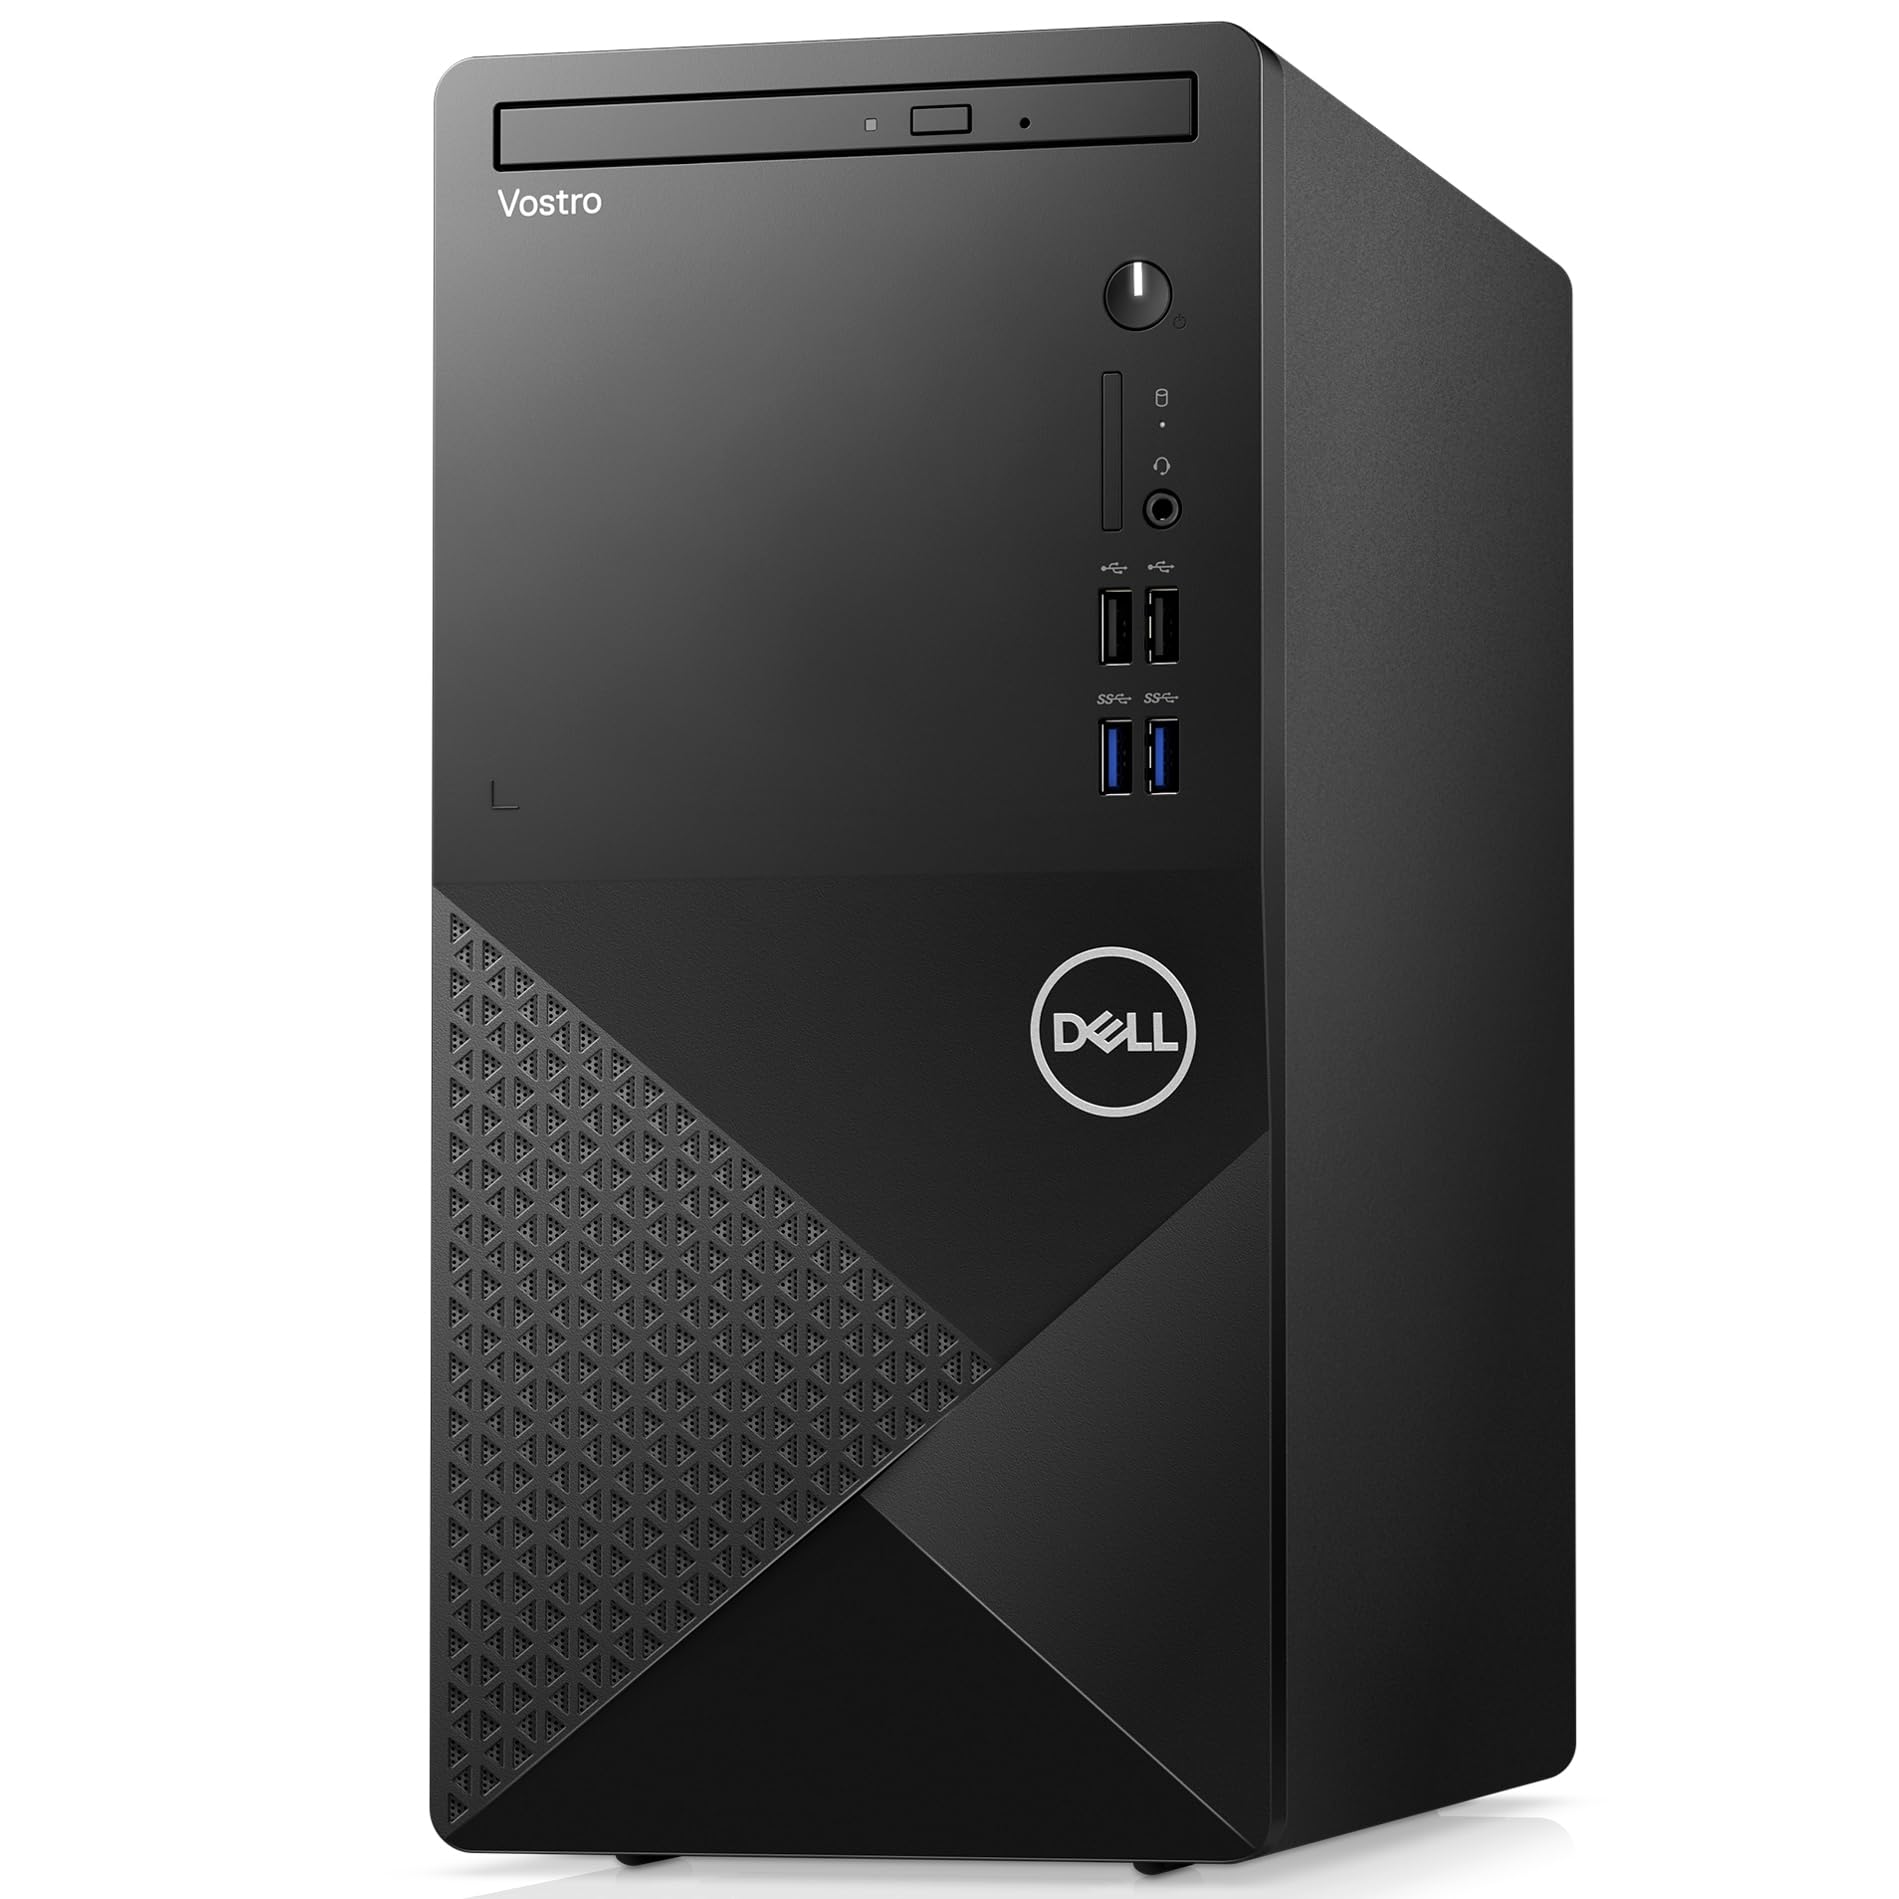 Dell 2023 Vostro 3910 Full Size Tower Business Desktop, 12th Gen Intel 12-Core i7-12700 up to 4.9GHz, 32GB DDR4 RAM, 1TB PCIe SSD, AC WiFi, Bluetooth 5.0, Keyboard & Mouse, Windows 11 Pro